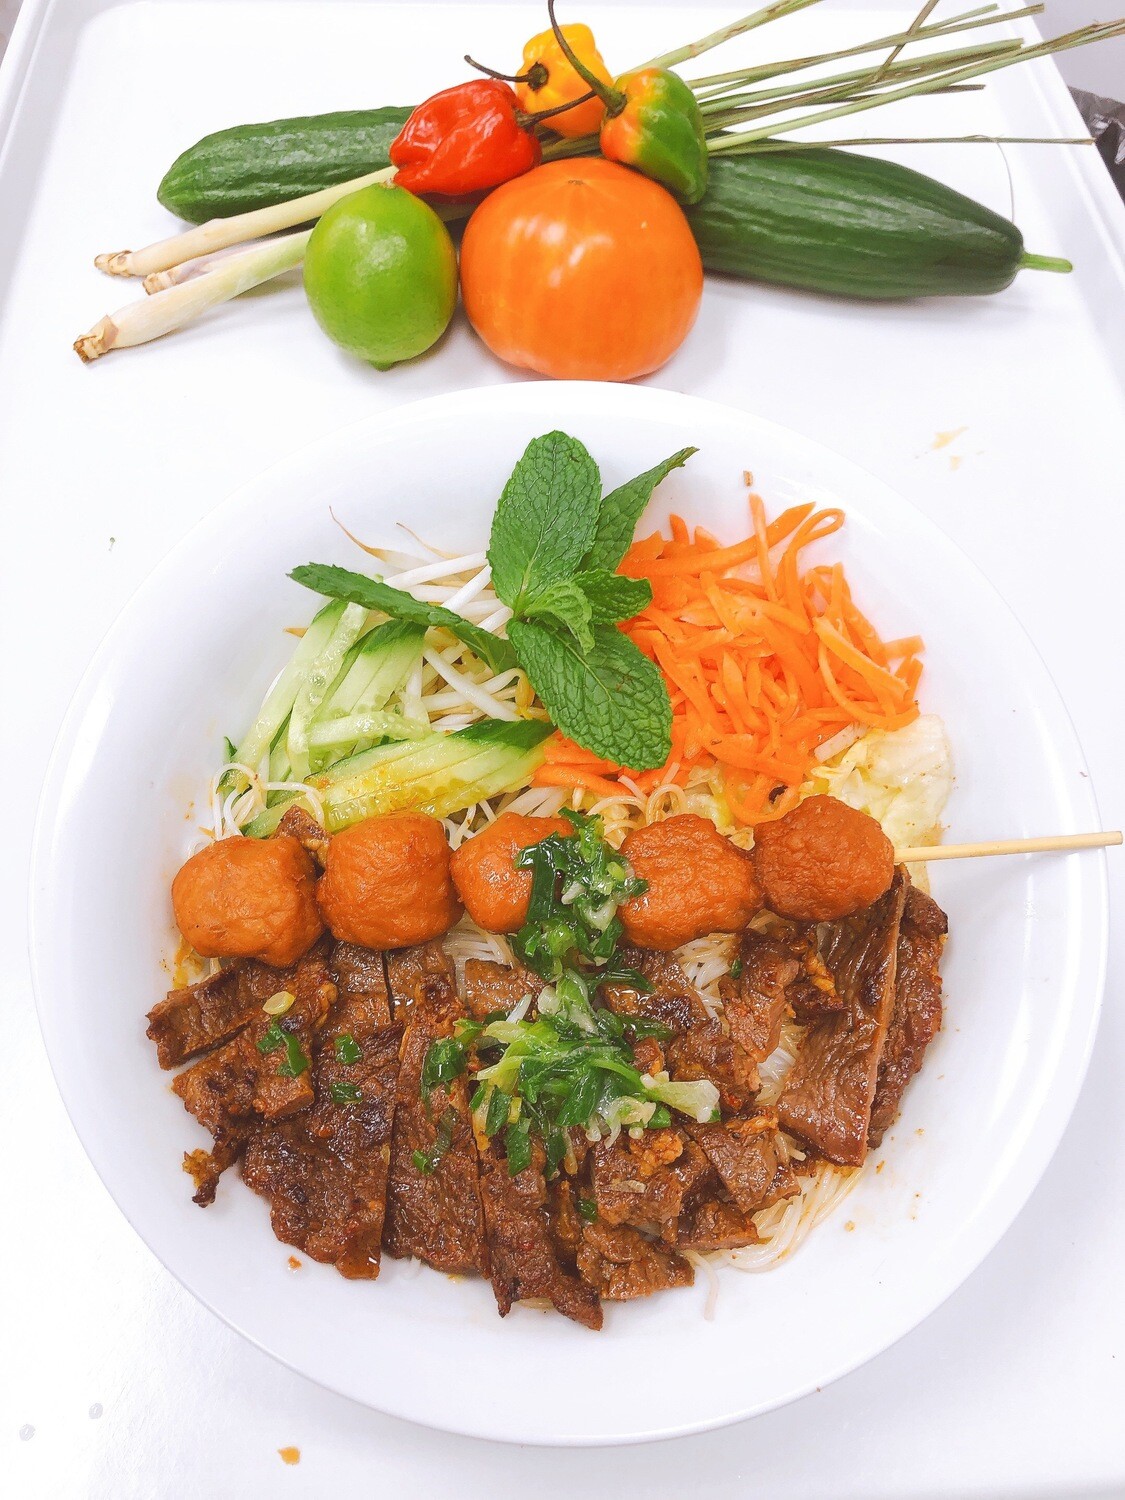 403- Vermicelli with Grilled Beef (Plus One Item)